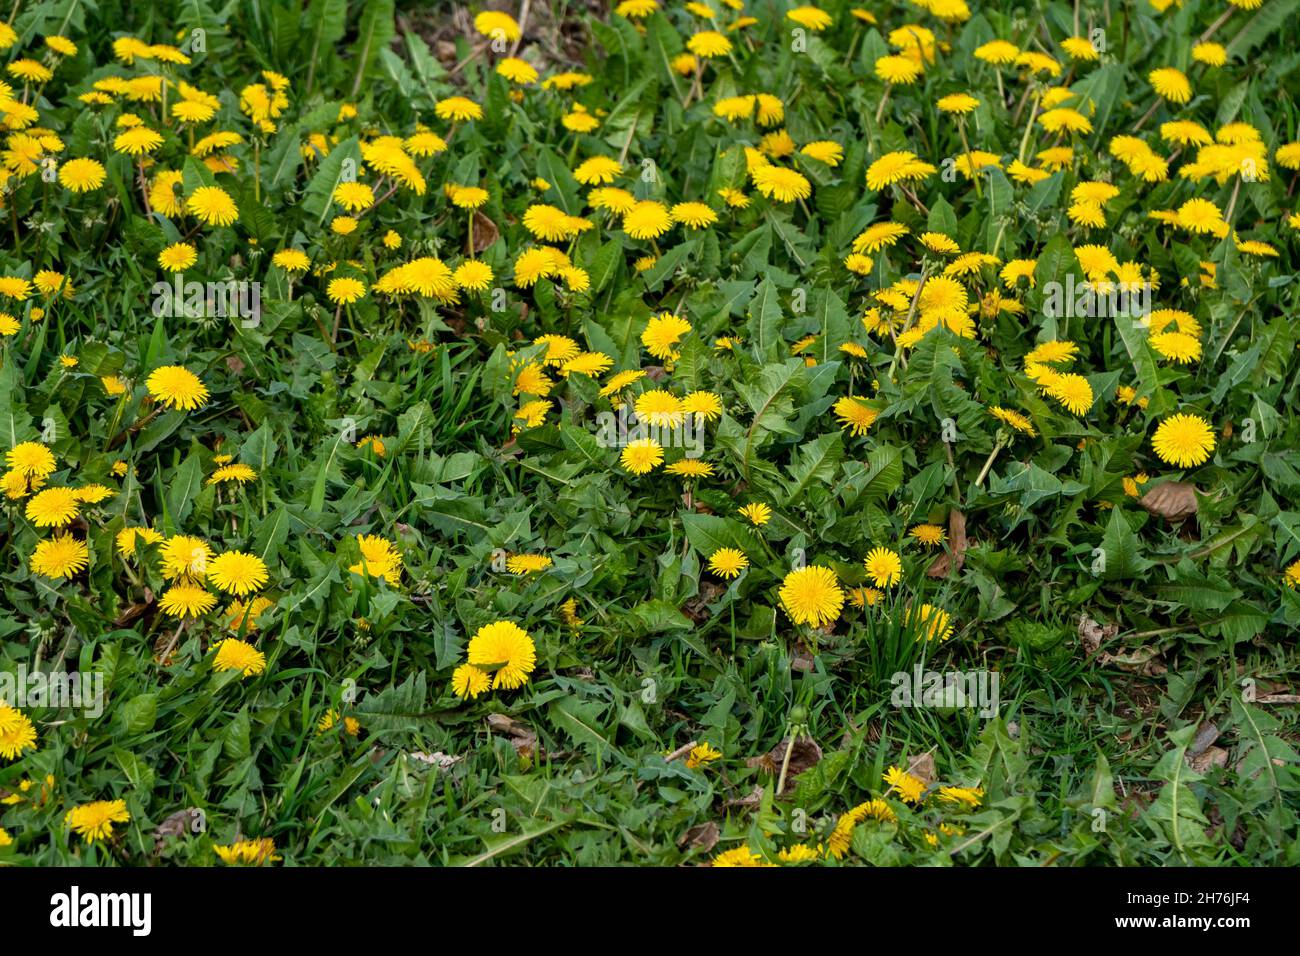 A glade with blooming yellow dandelions (lat. Taraxacum) among green foliage in spring. Stock Photo